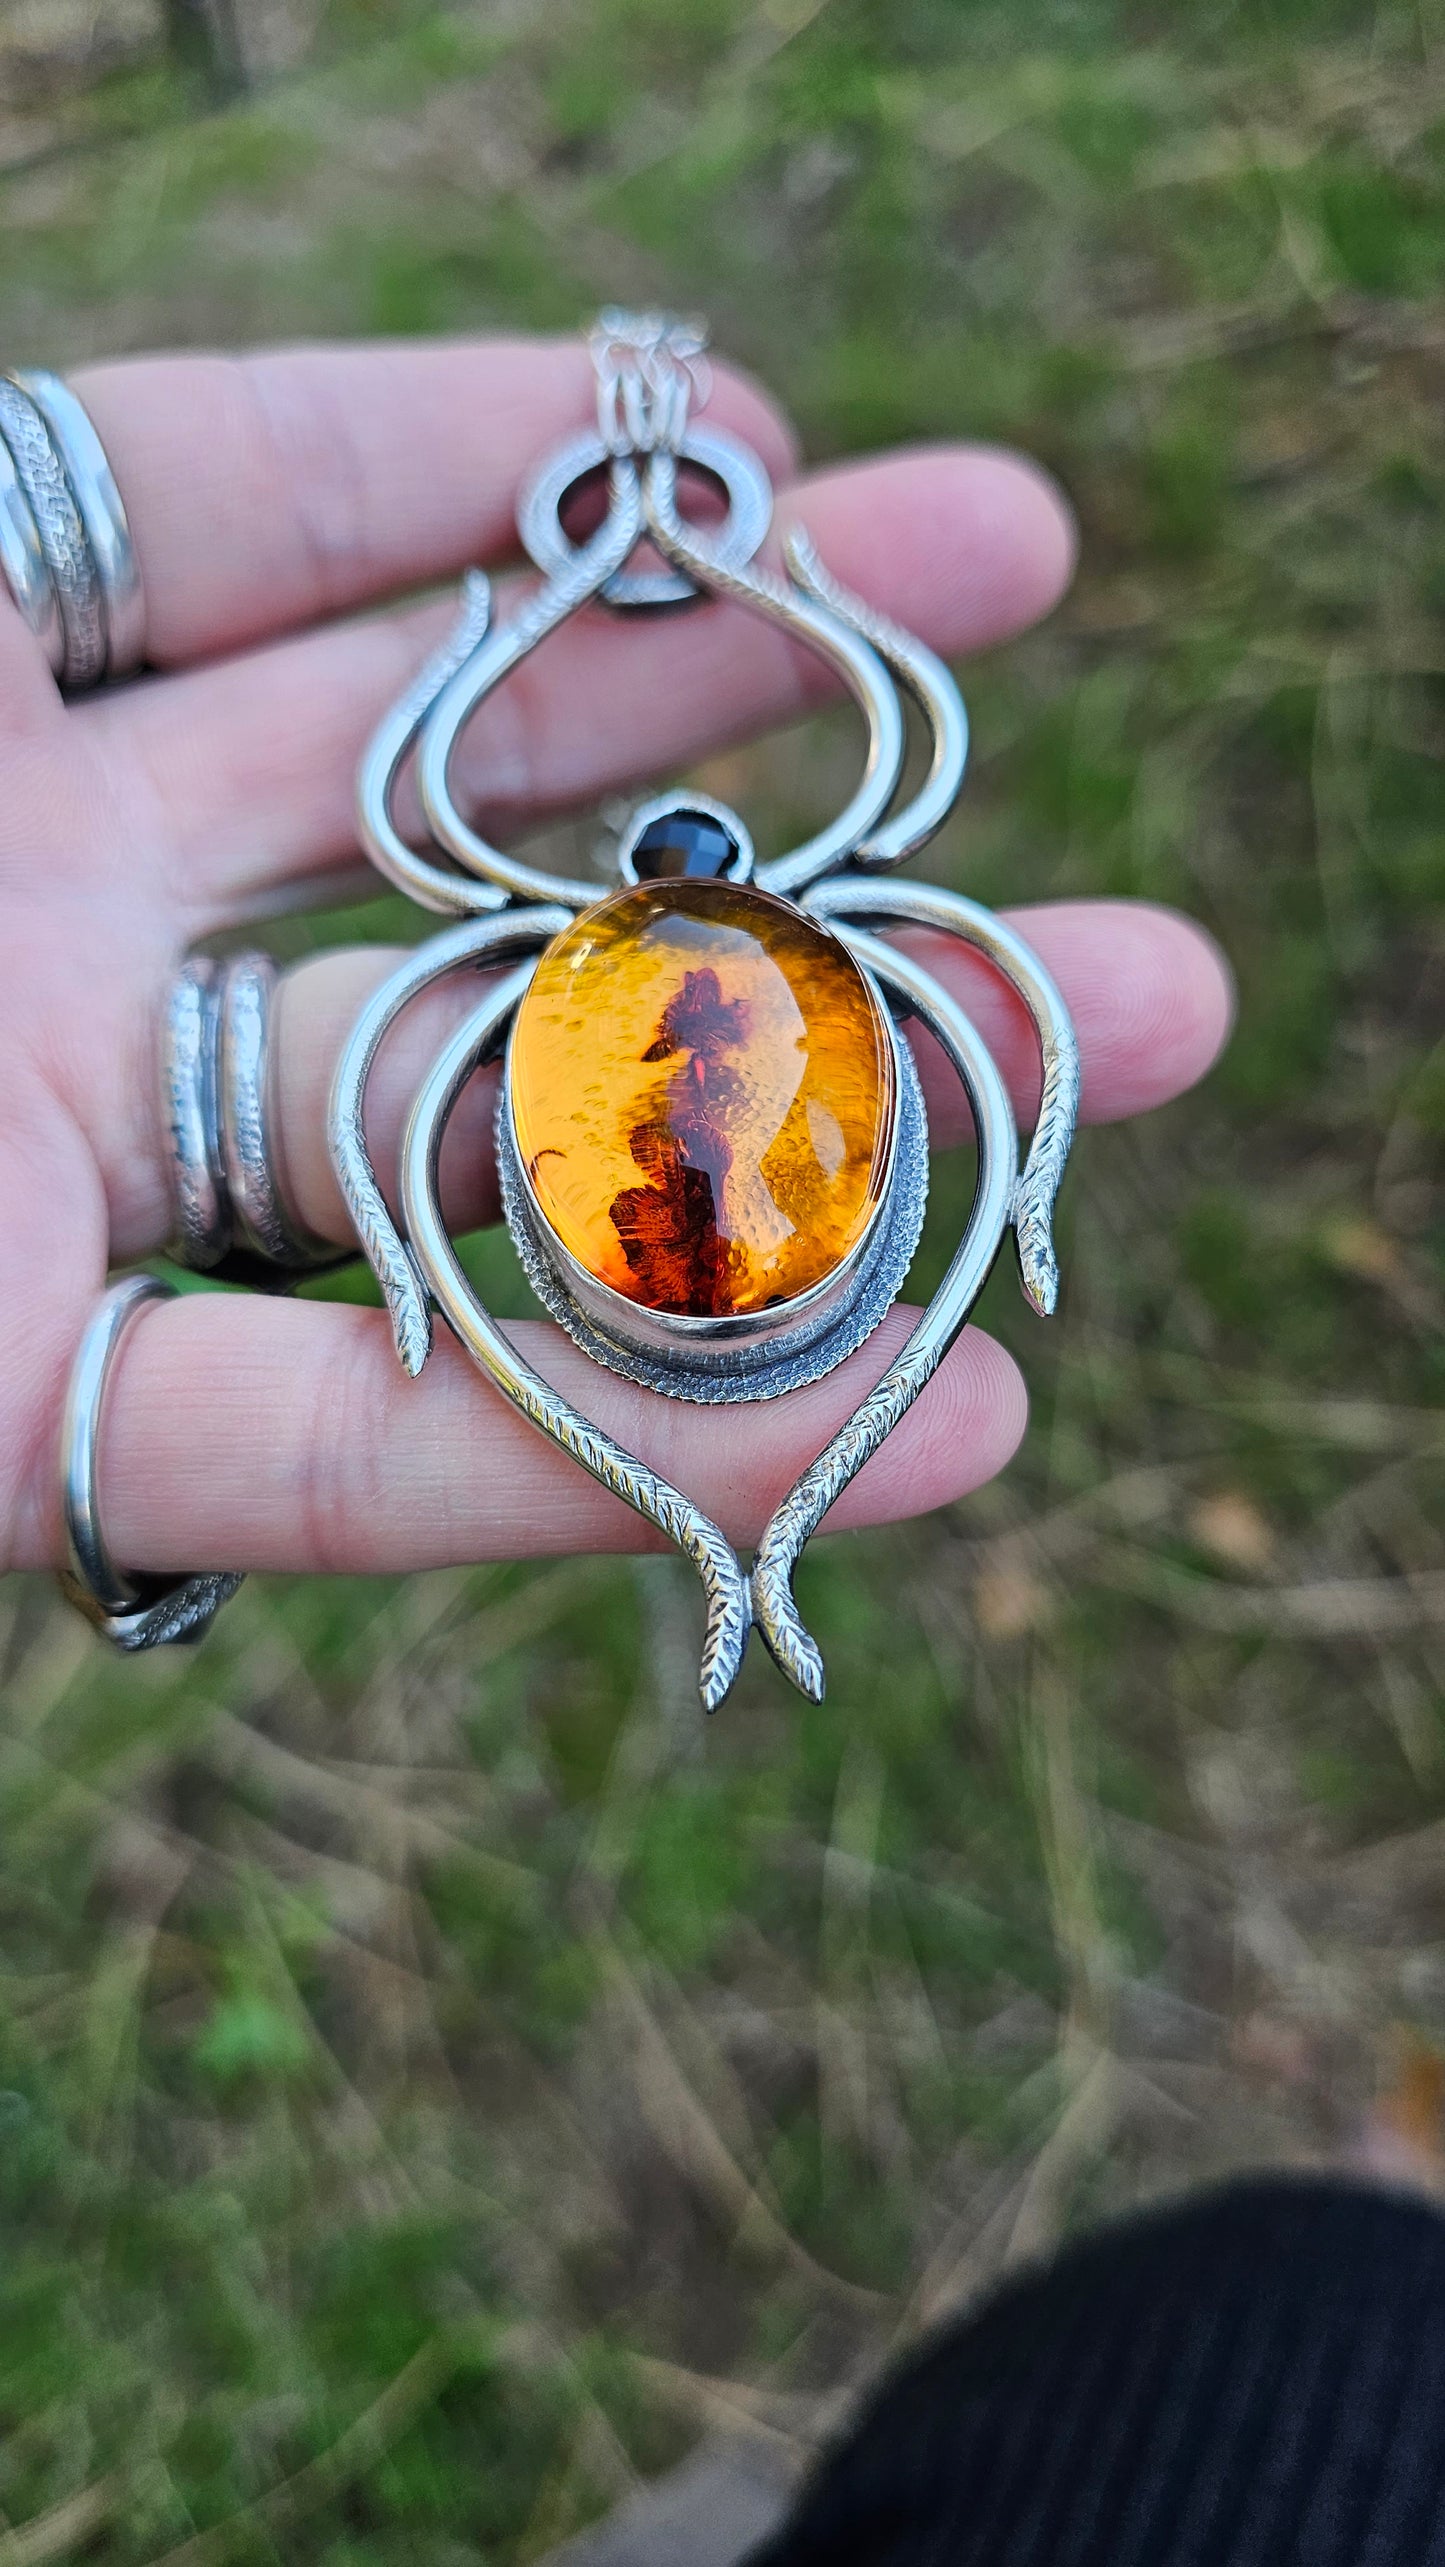 XX//SPIDER SENSE Statement Necklace - Baltic Amber and Black Onyx set in Fine and Sterling Silver